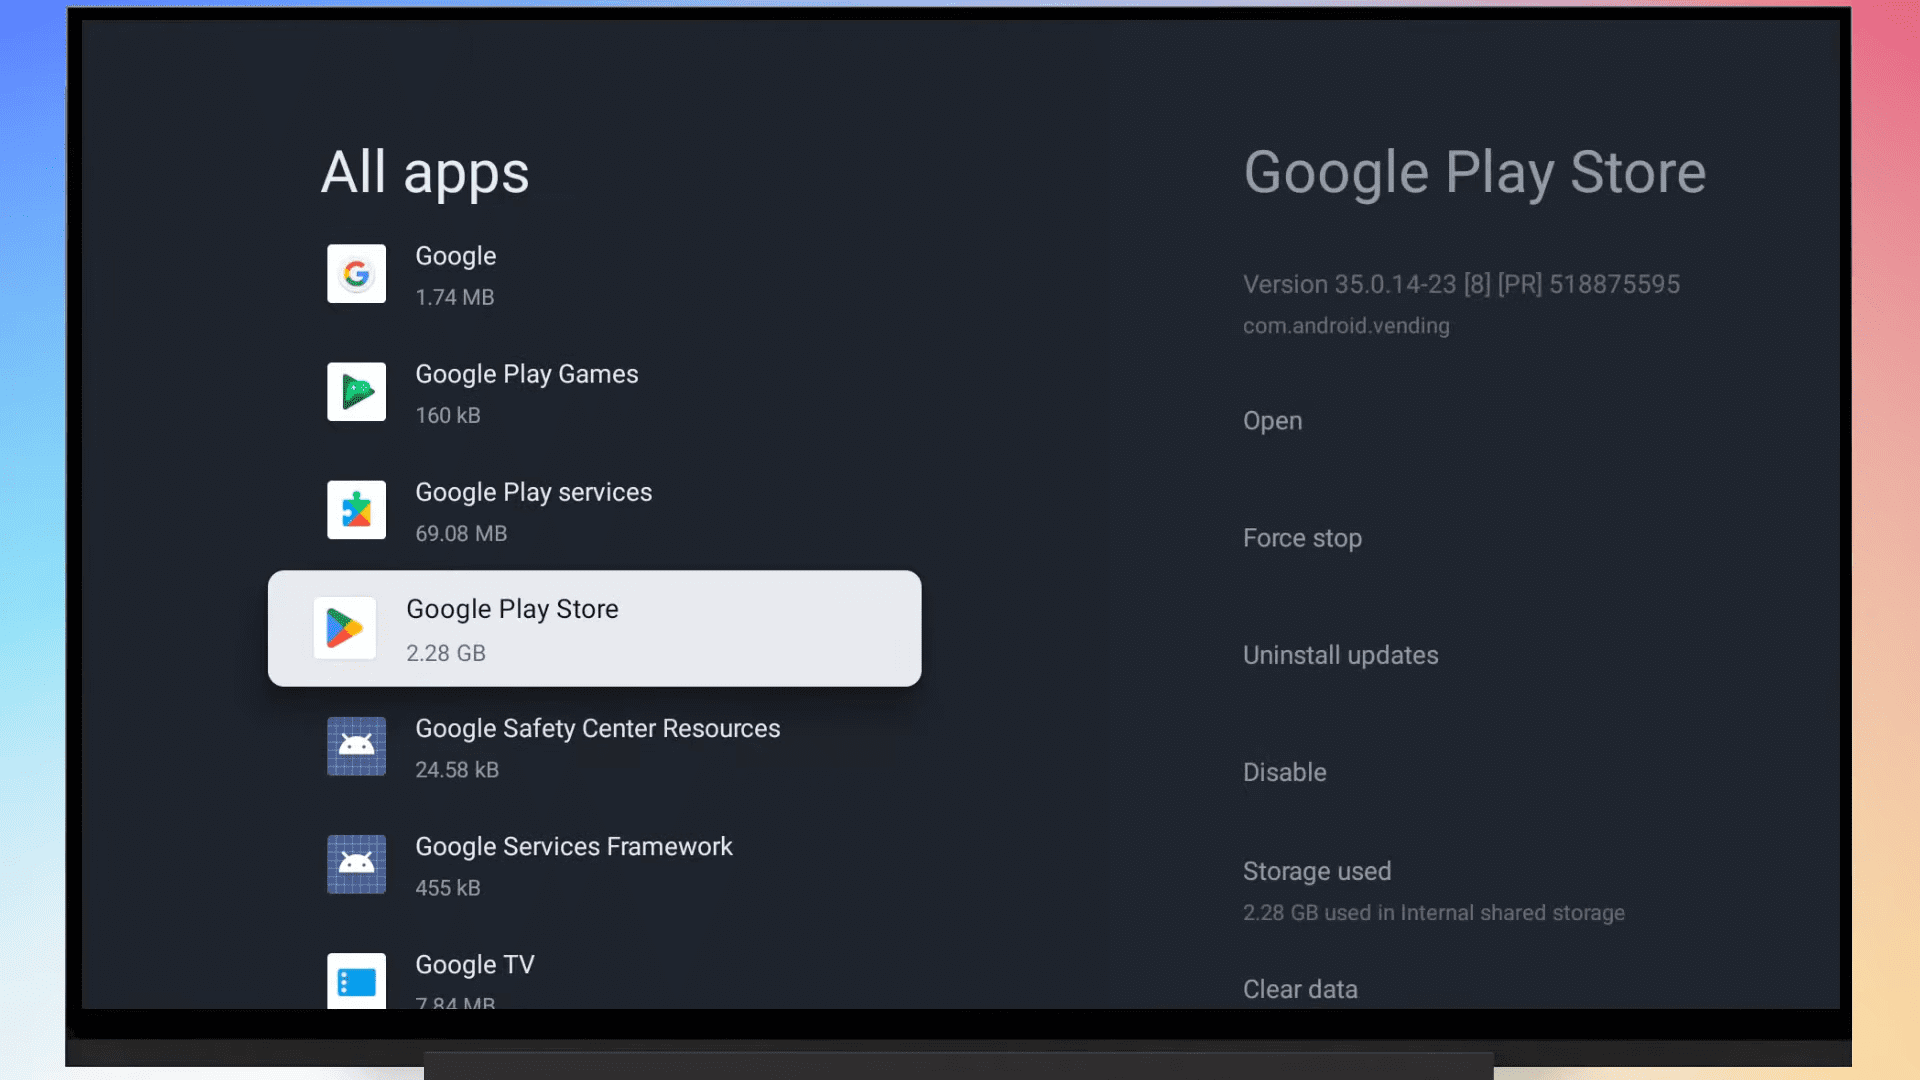 Finding the Google Play Store App